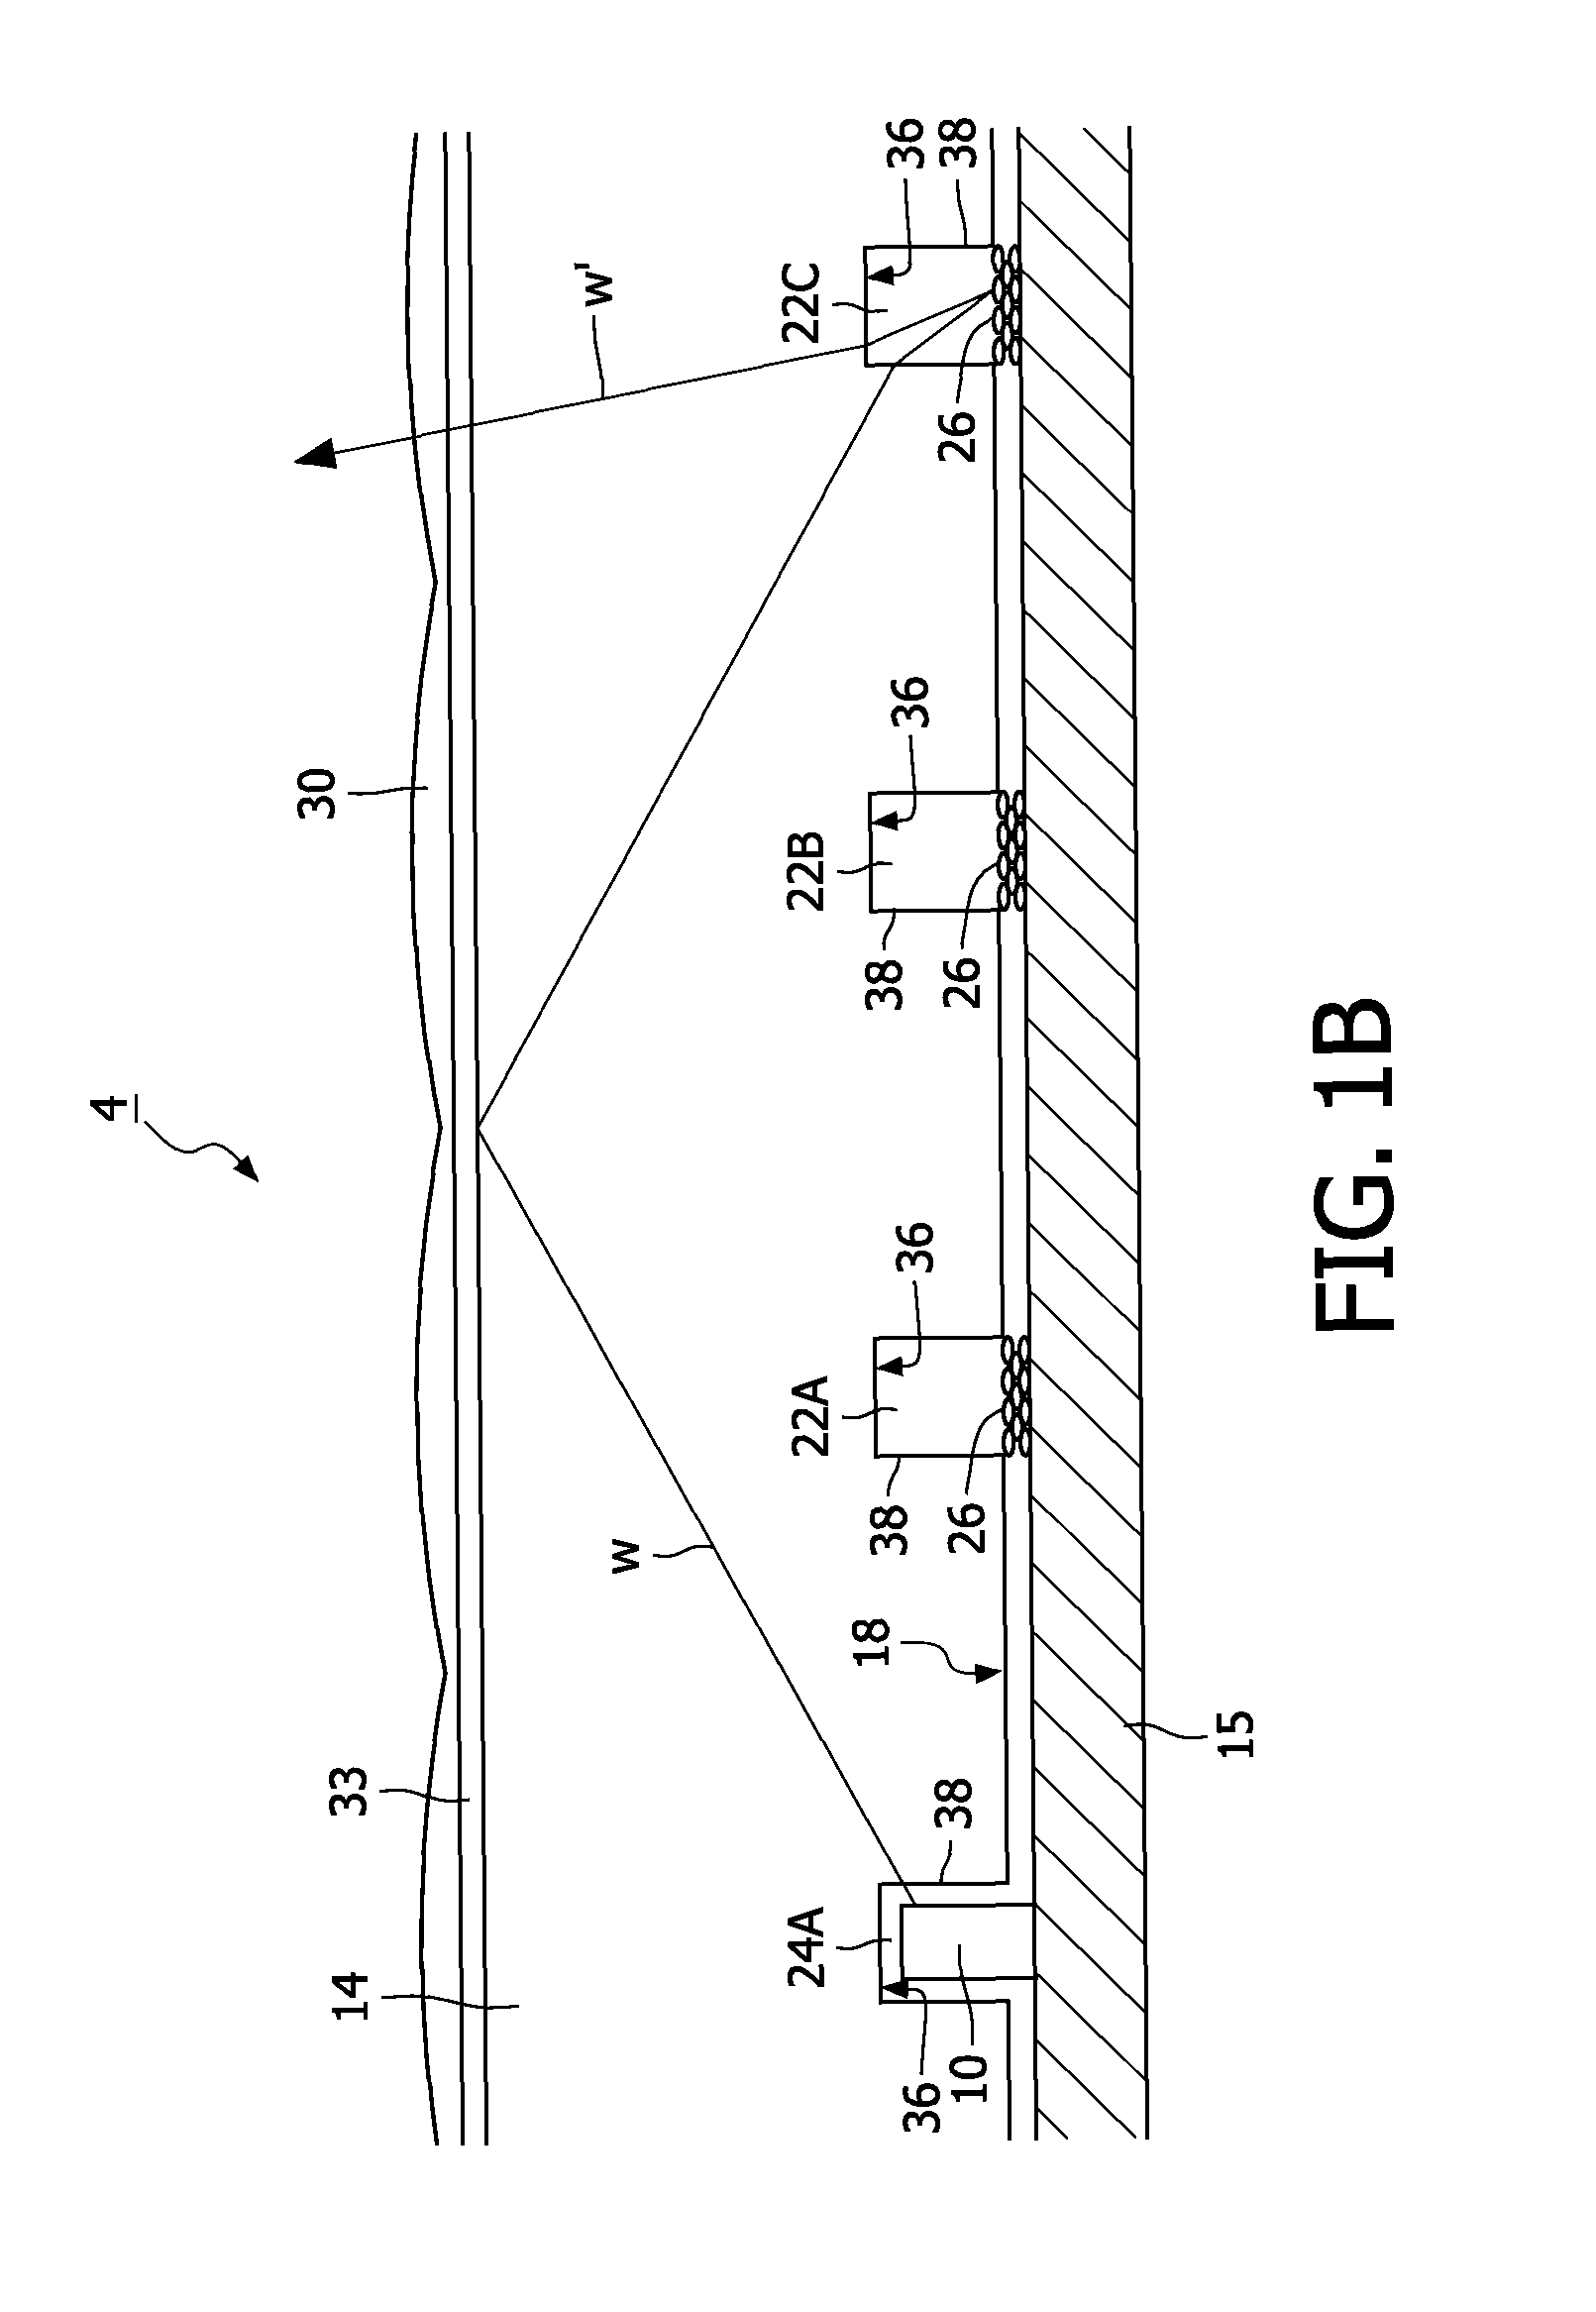 Illumination system for luminaires and display devices